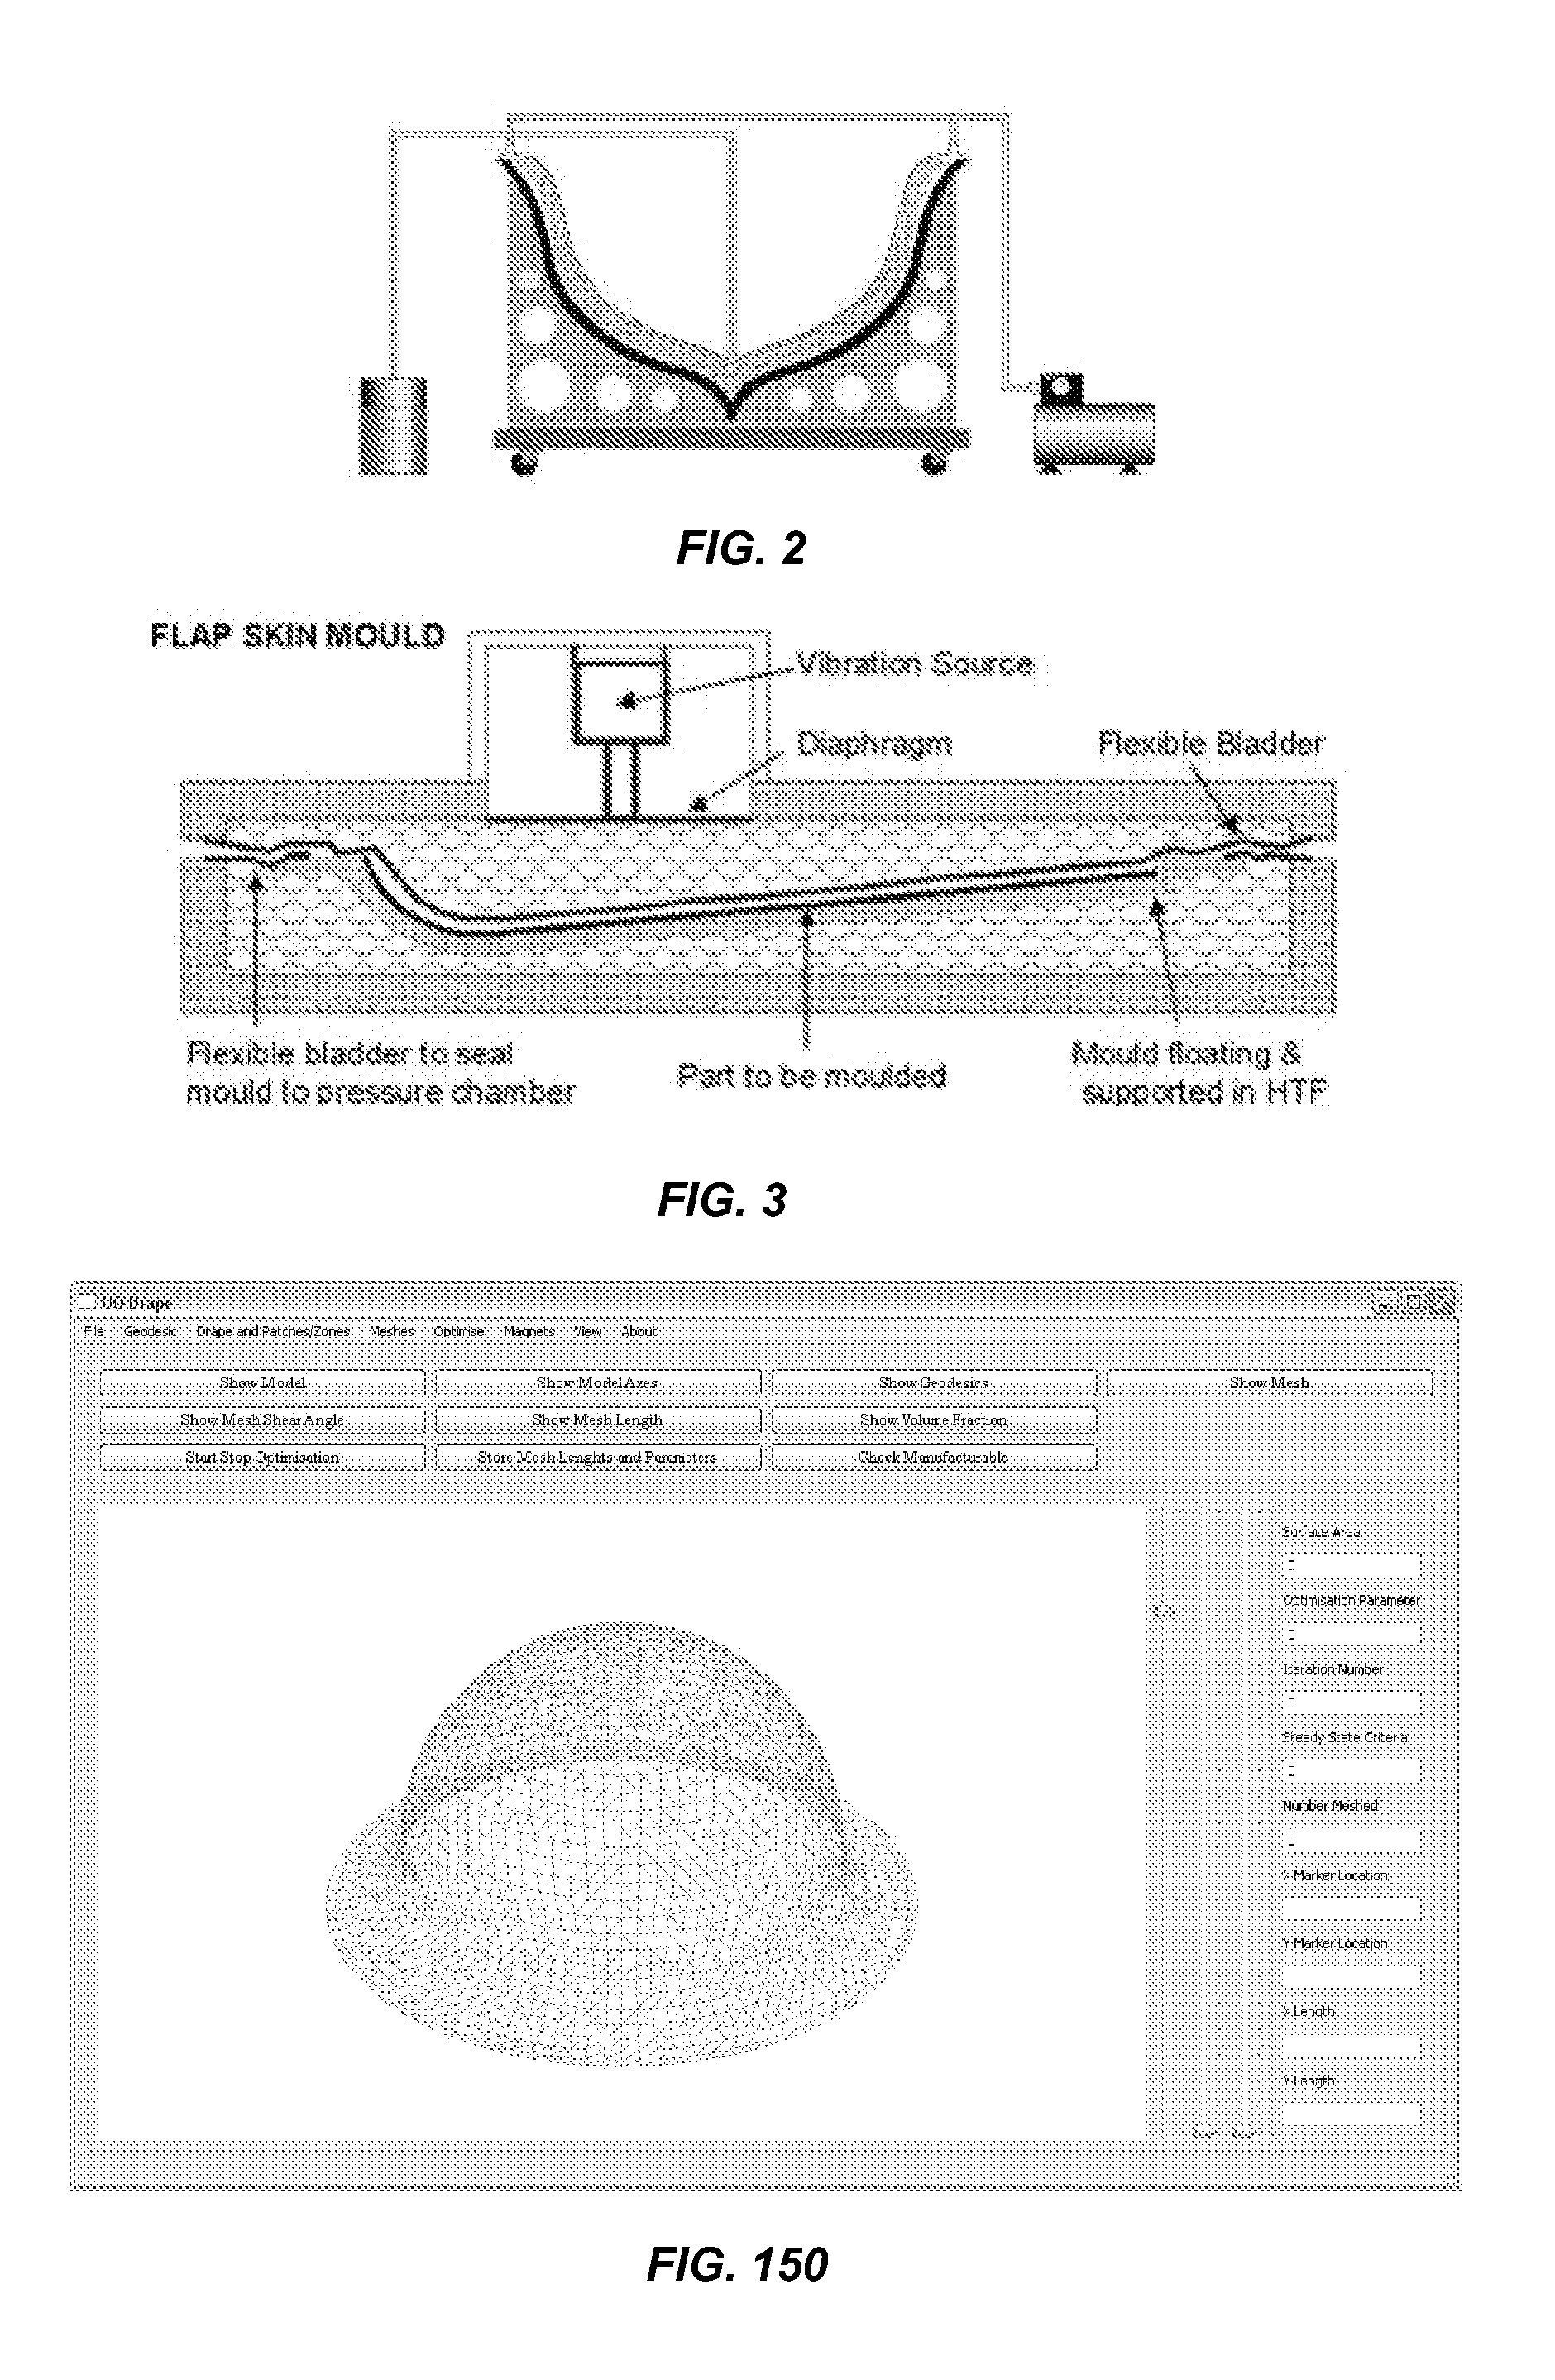 Novel composite parts, methods and apparatus for manufacturing the same